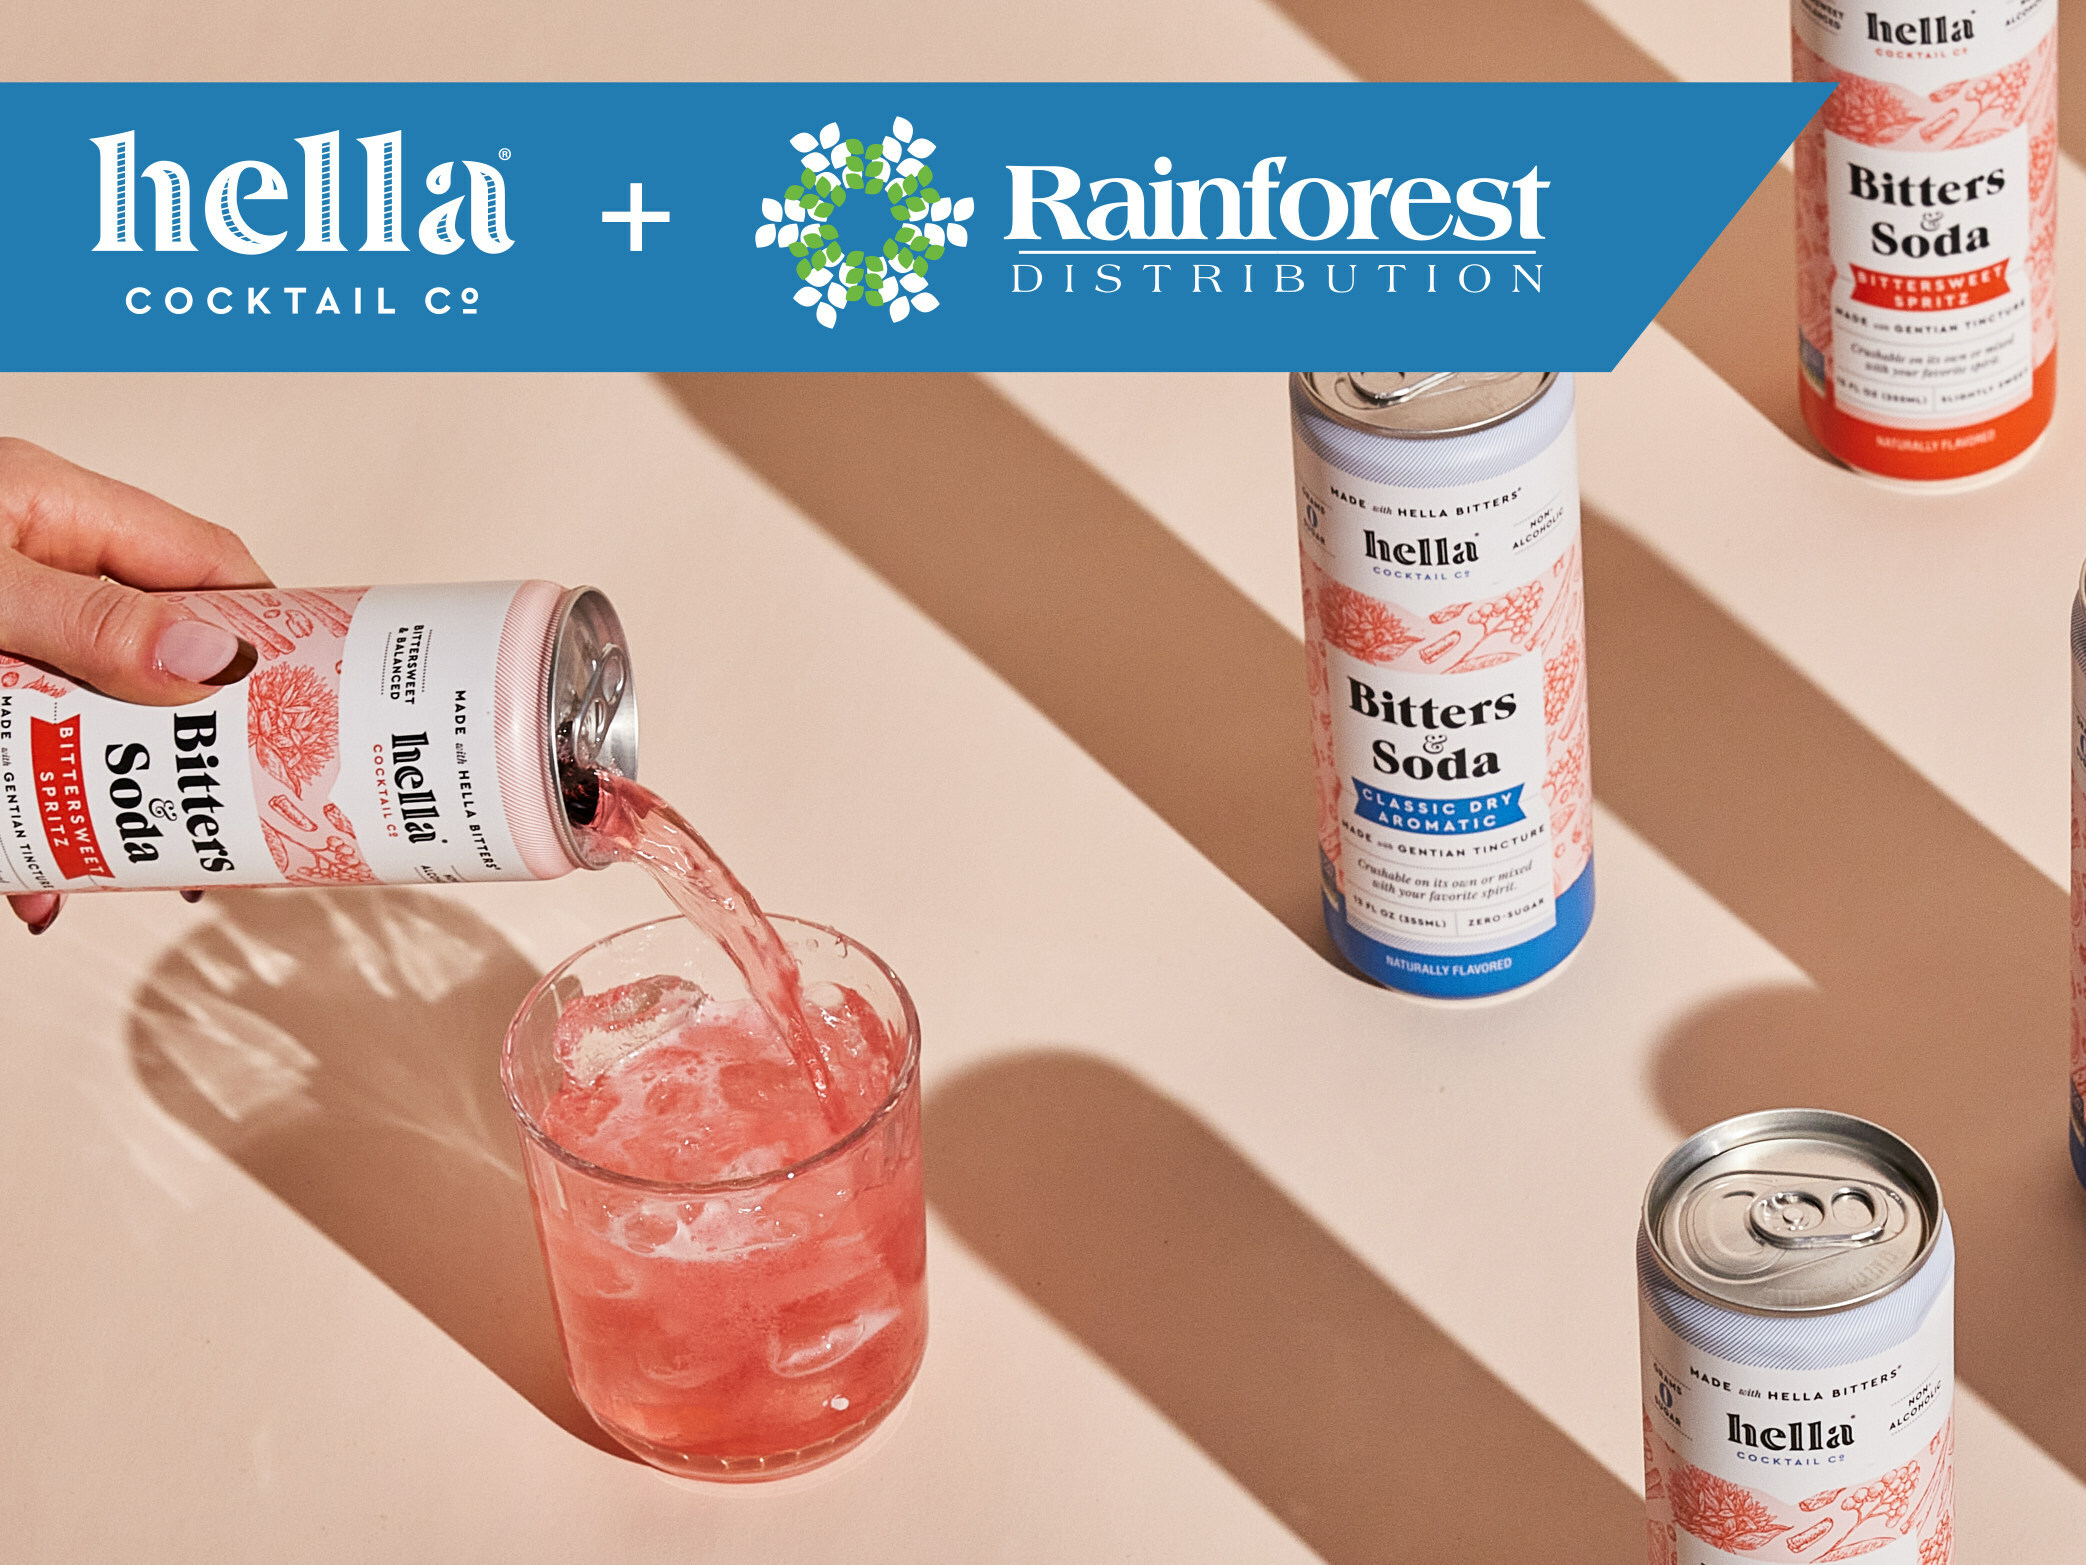 Hella Cocktail Co. Gains Traction with New Partner, Rainforest Distribution  – Craft Spirits Magazine